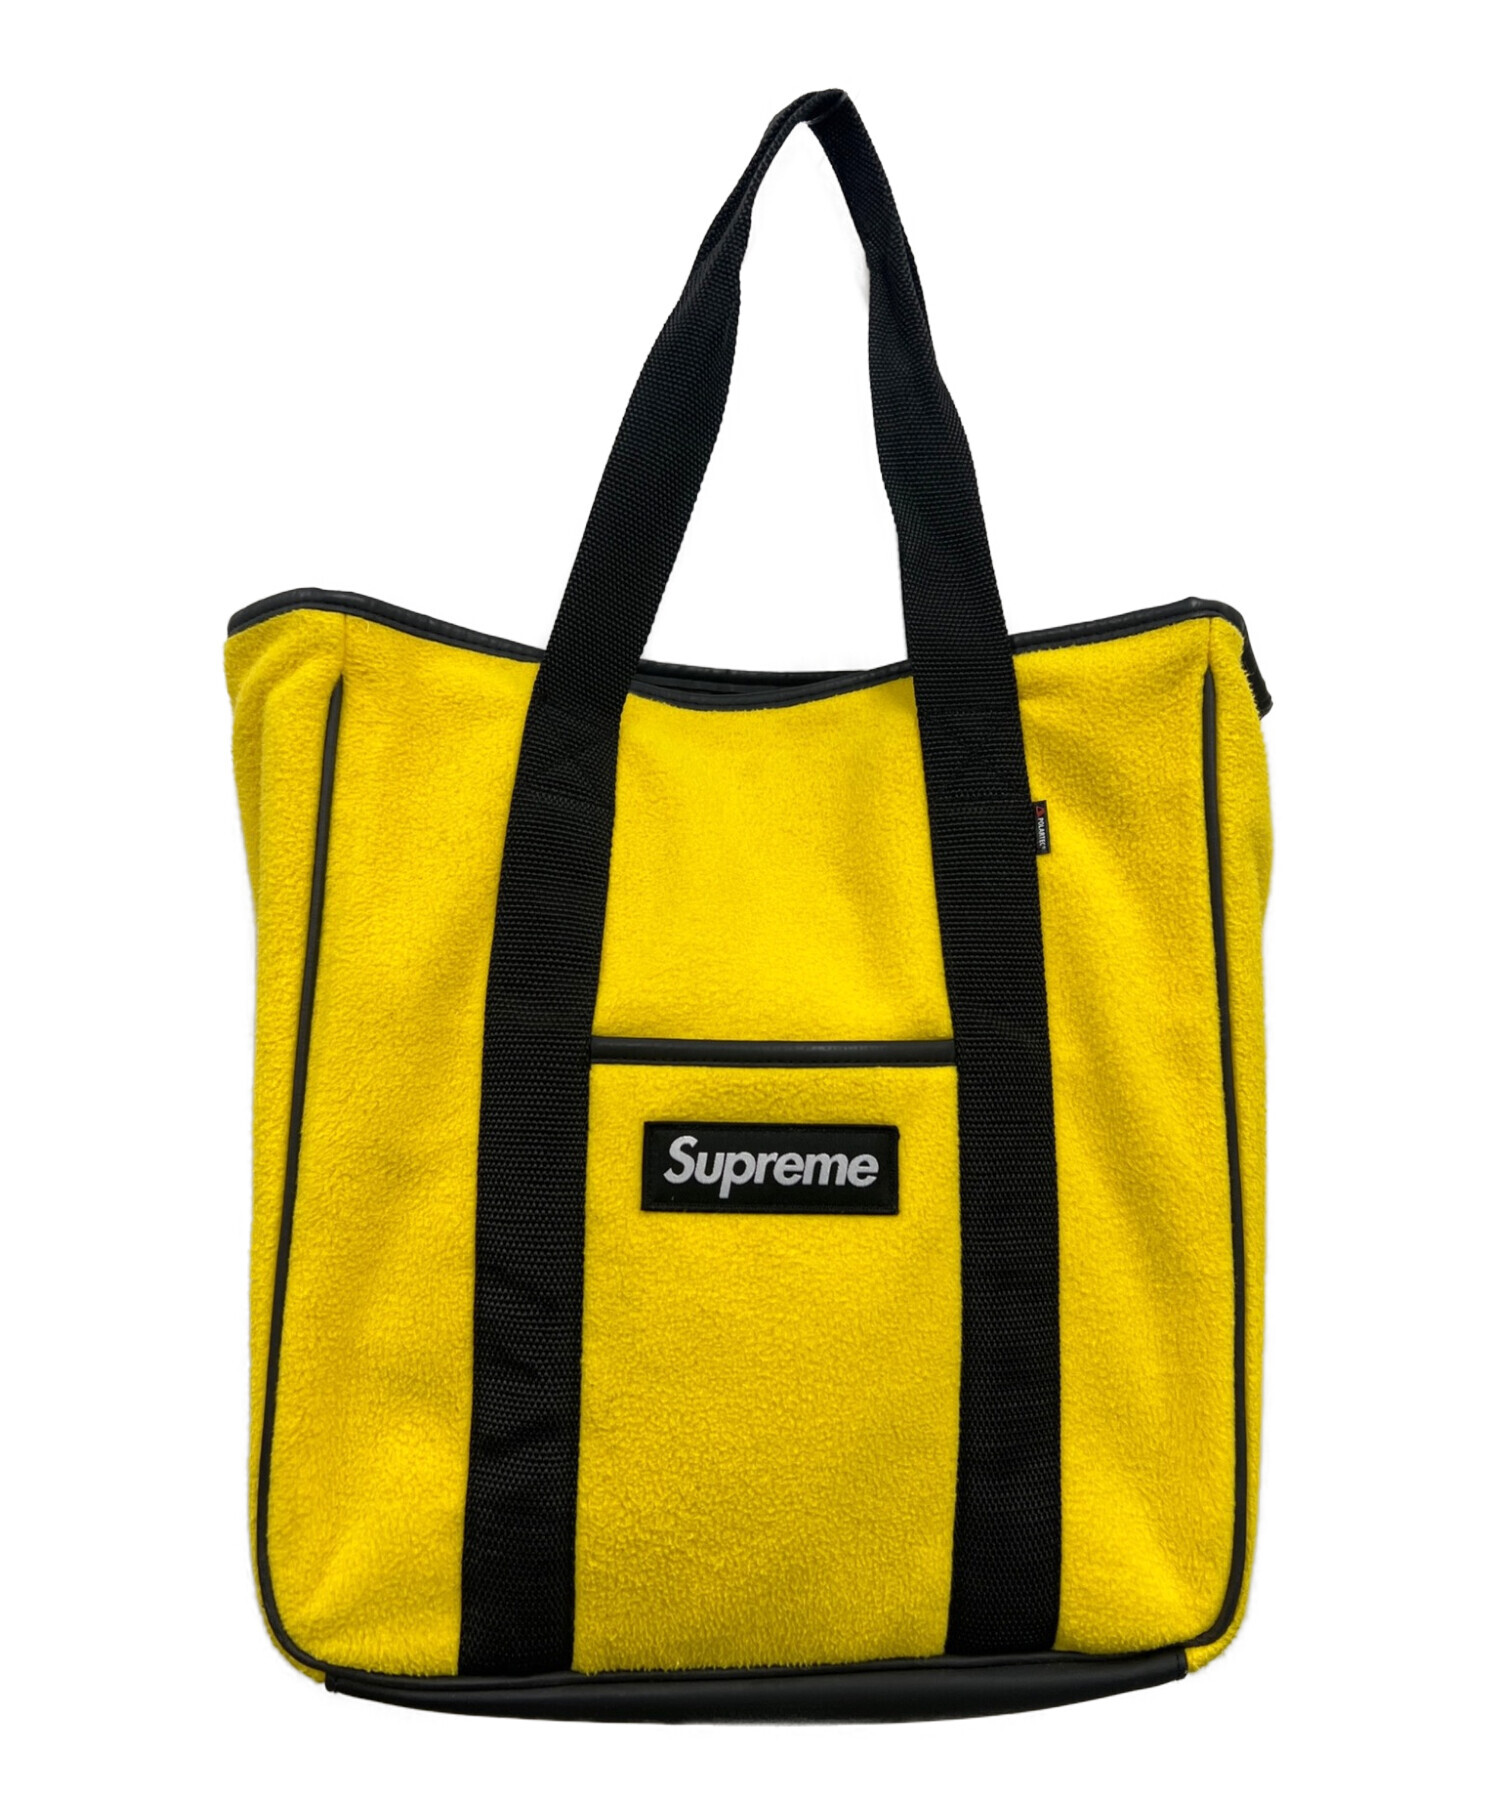 SUPREME (シュプリーム) Polartec Tote Bag ポーラテックトートバッグ イエロー